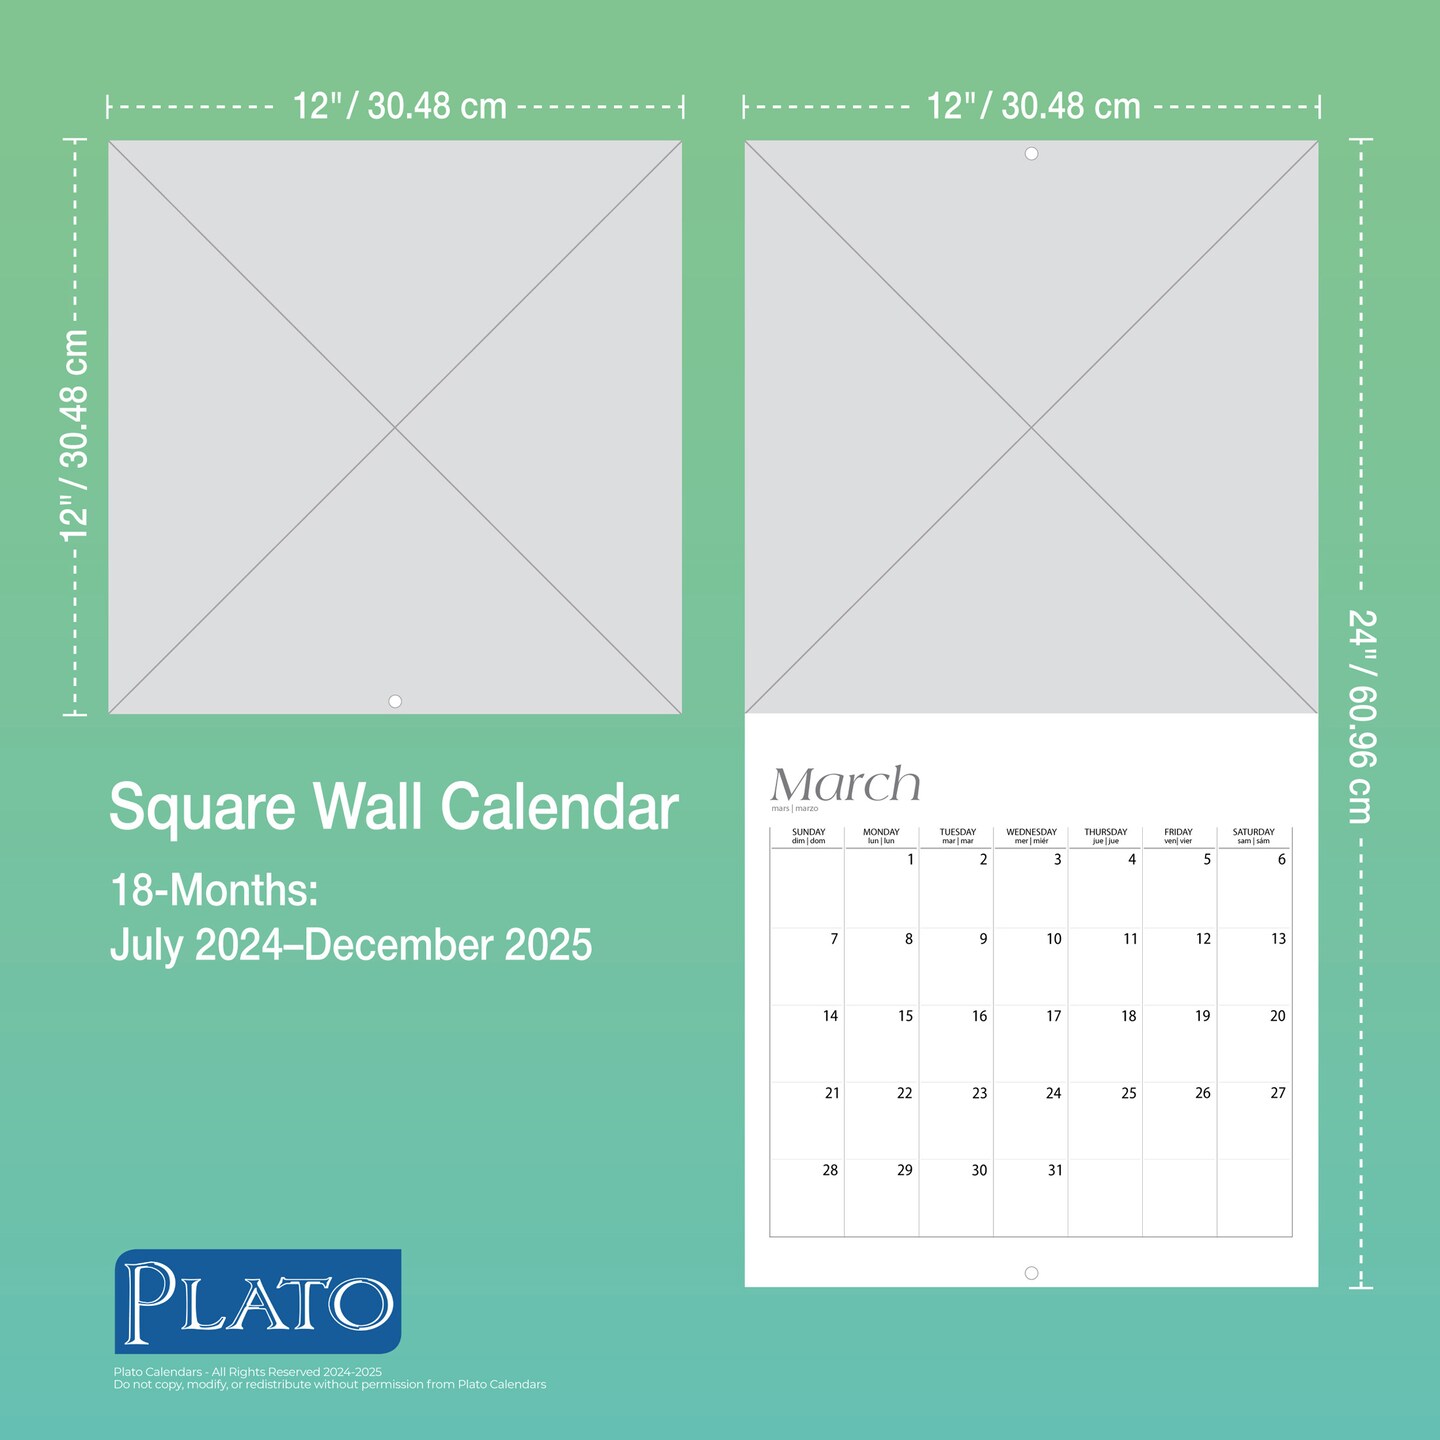 NASA Explore the Universe | 2025 12 x 24 Inch 18 Months Monthly Square Wall Calendar | July 2024 - December 2025 | Plastic-Free | Plato | Space Cosmos Inspiration